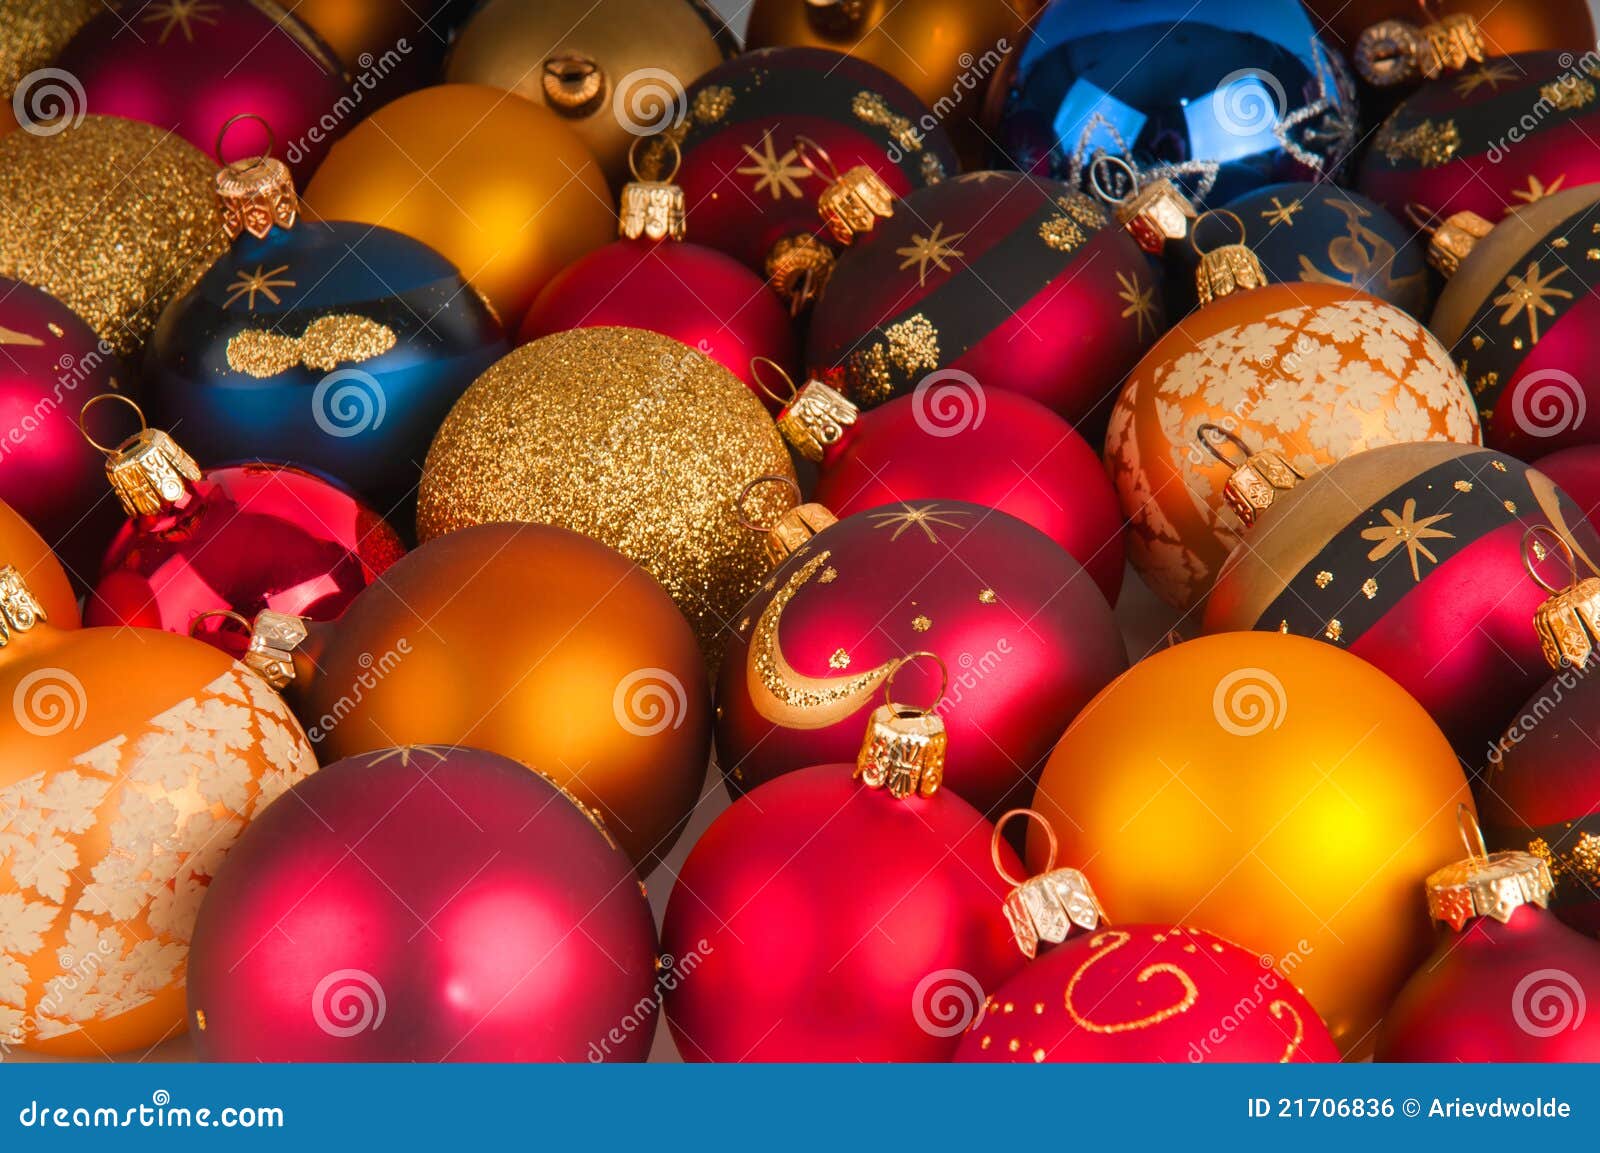 Christmas ornaments stock photo. Image of merry, blue - 21706836